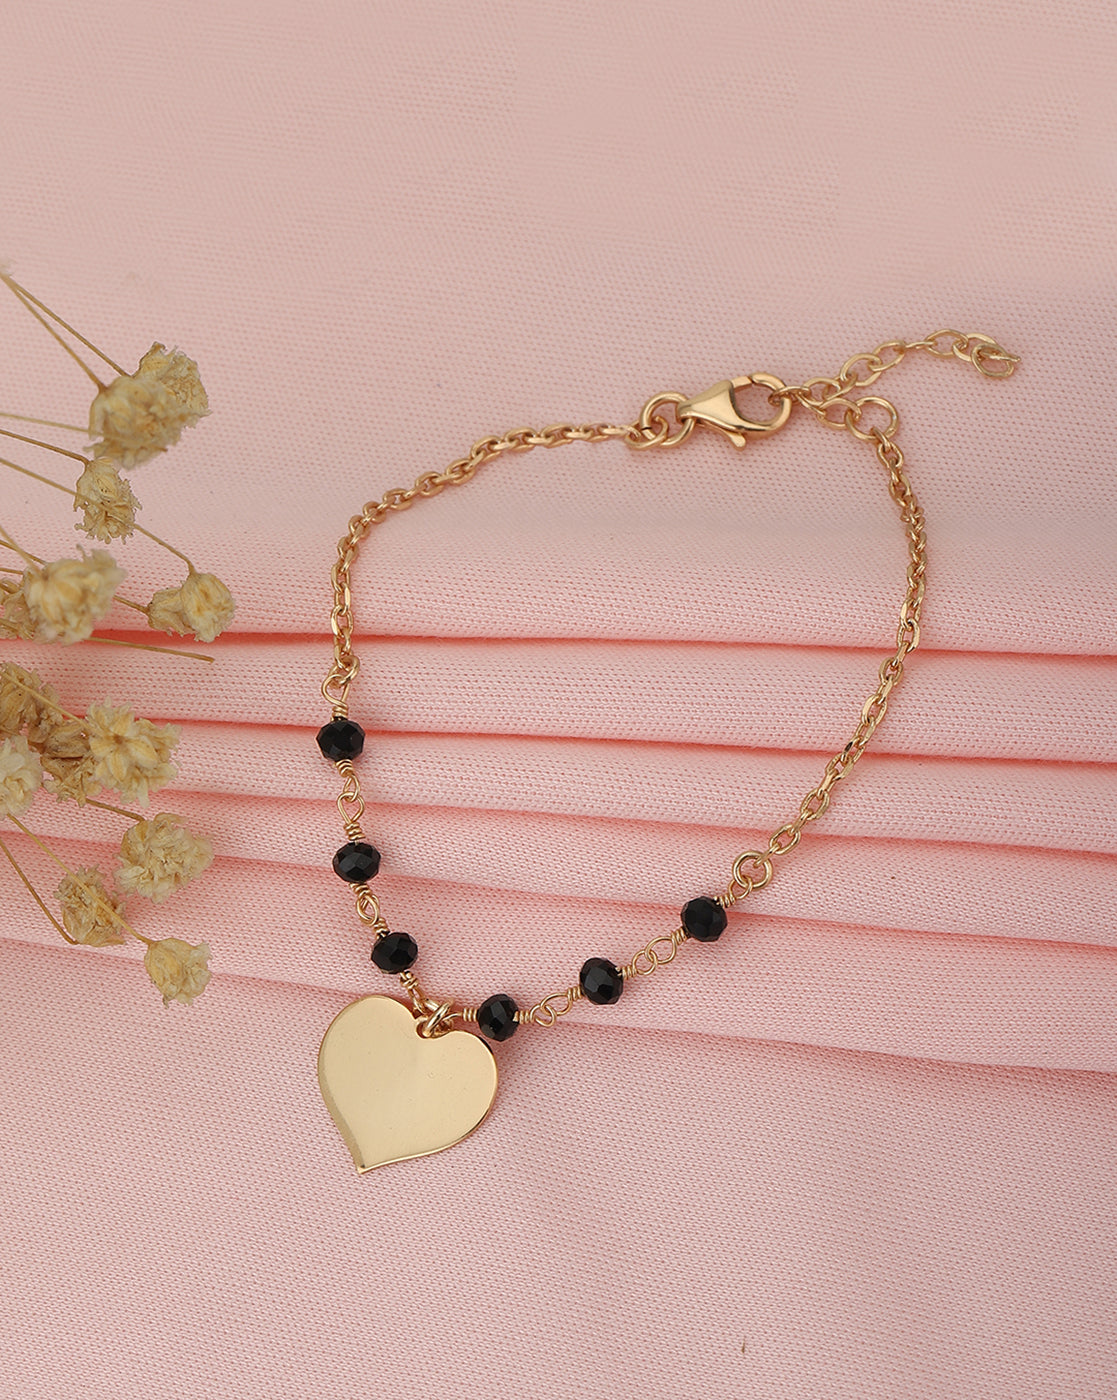 Rose-Gold Plated Charm Bracelet with Classic Heart Design